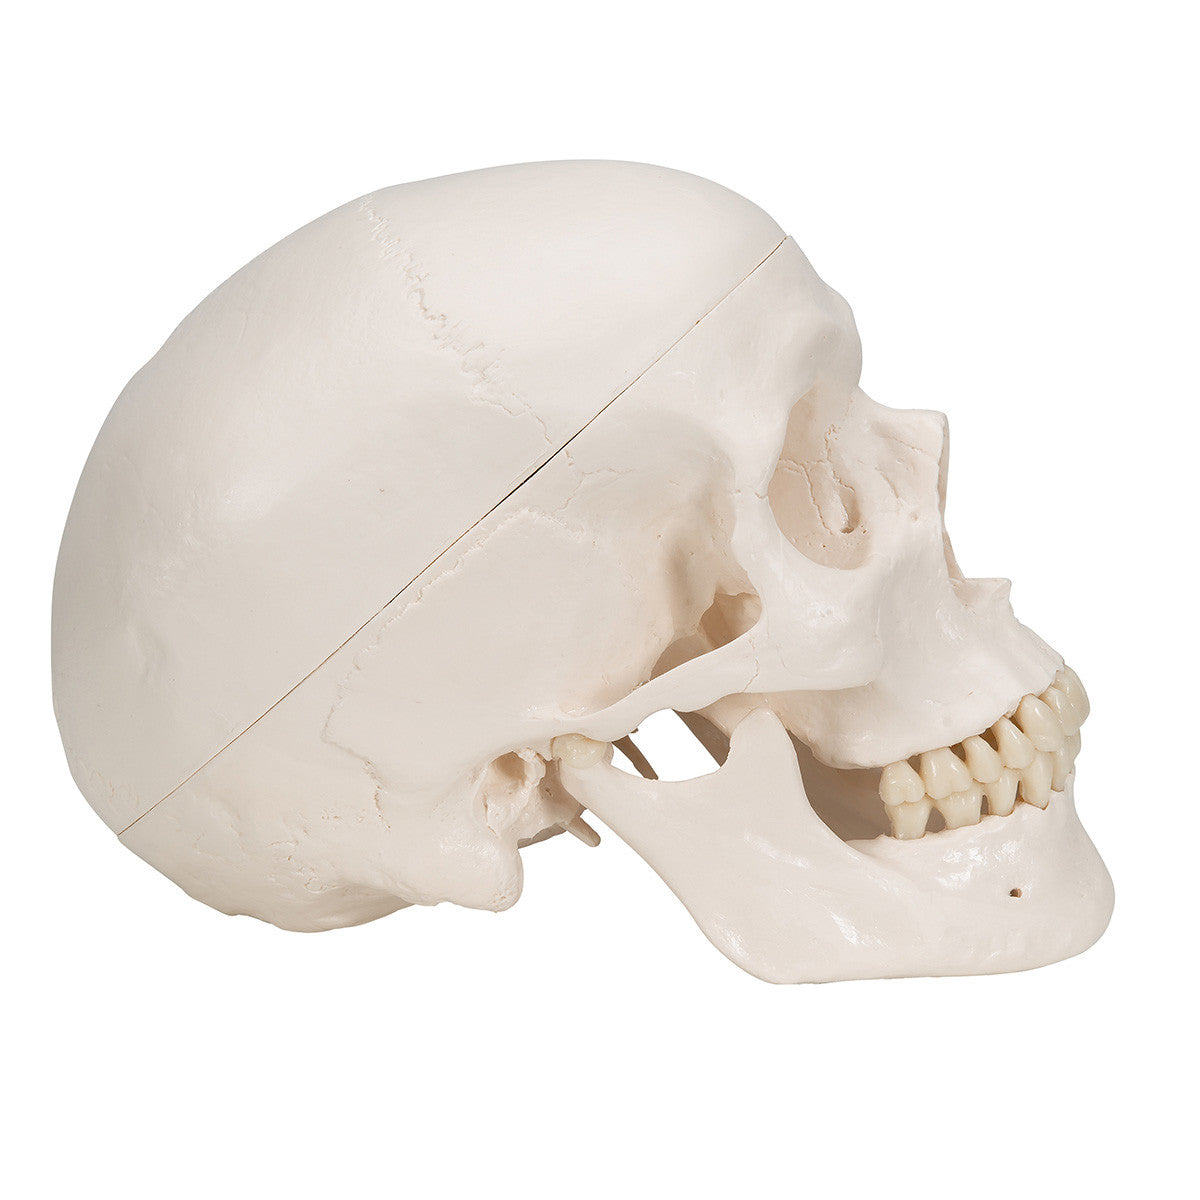 Standard Human Skull, natural cast, adult - lateral view